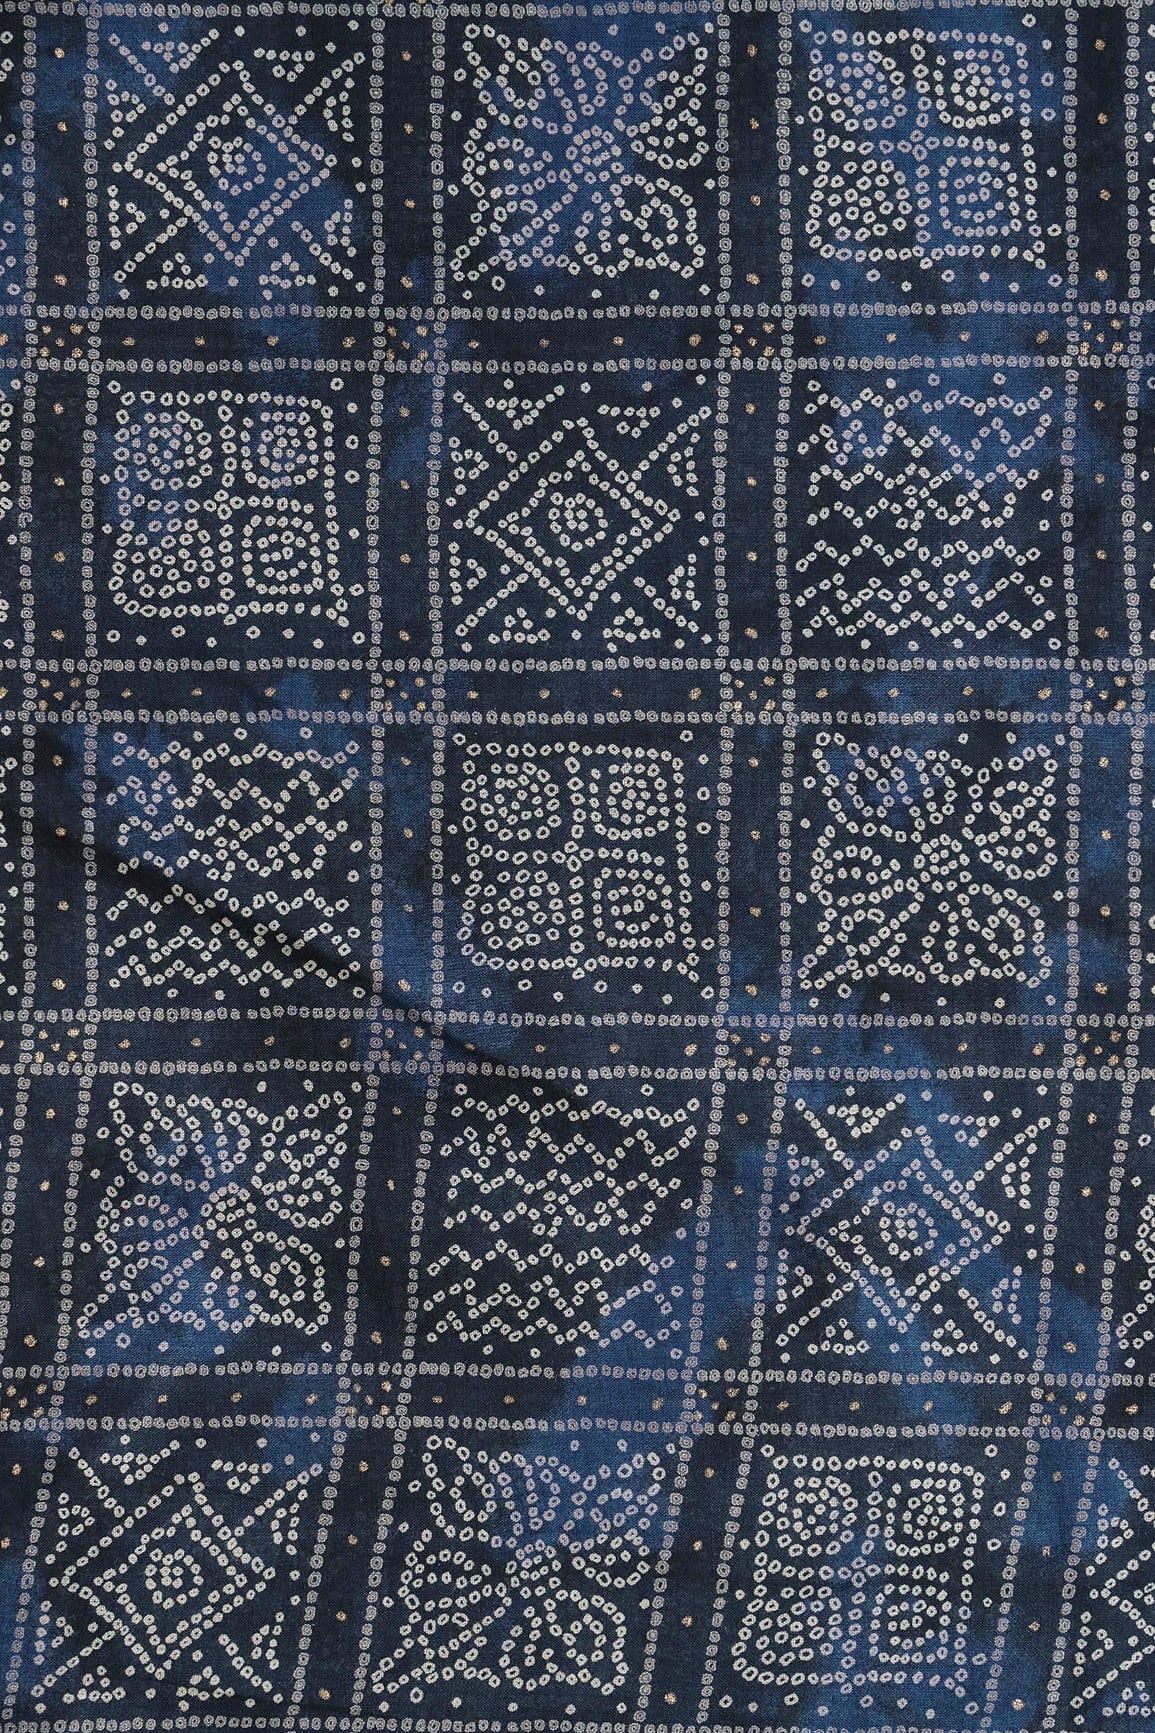 doeraa Prints Navy Blue And White Bandhani Pattern With Foil Print On Pure Mul Cotton Fabric